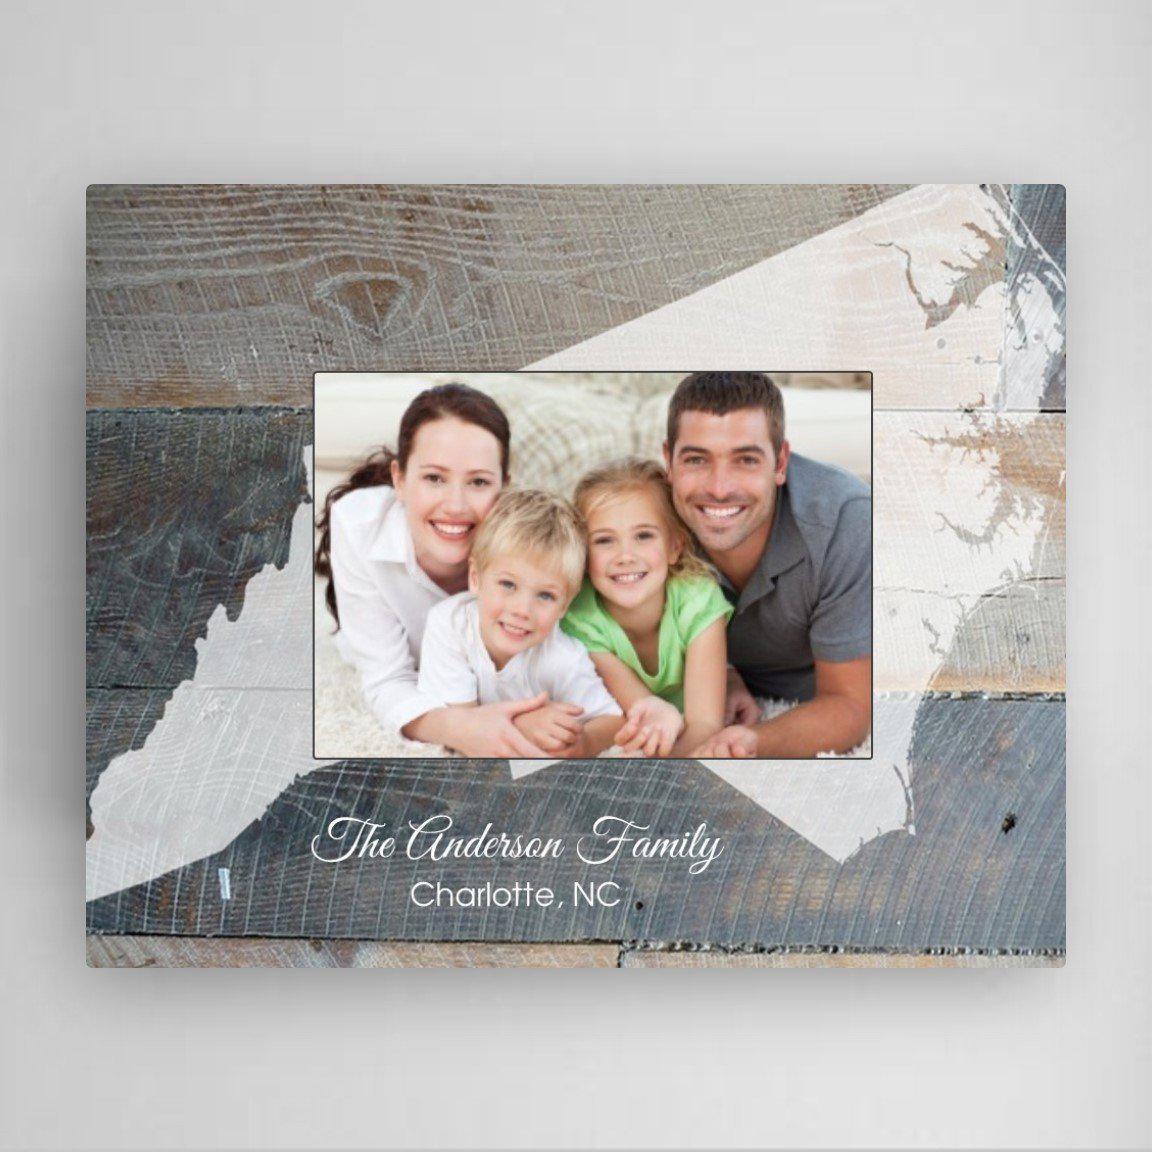 Personalized Picture Frames - Souvenir Home State Frame